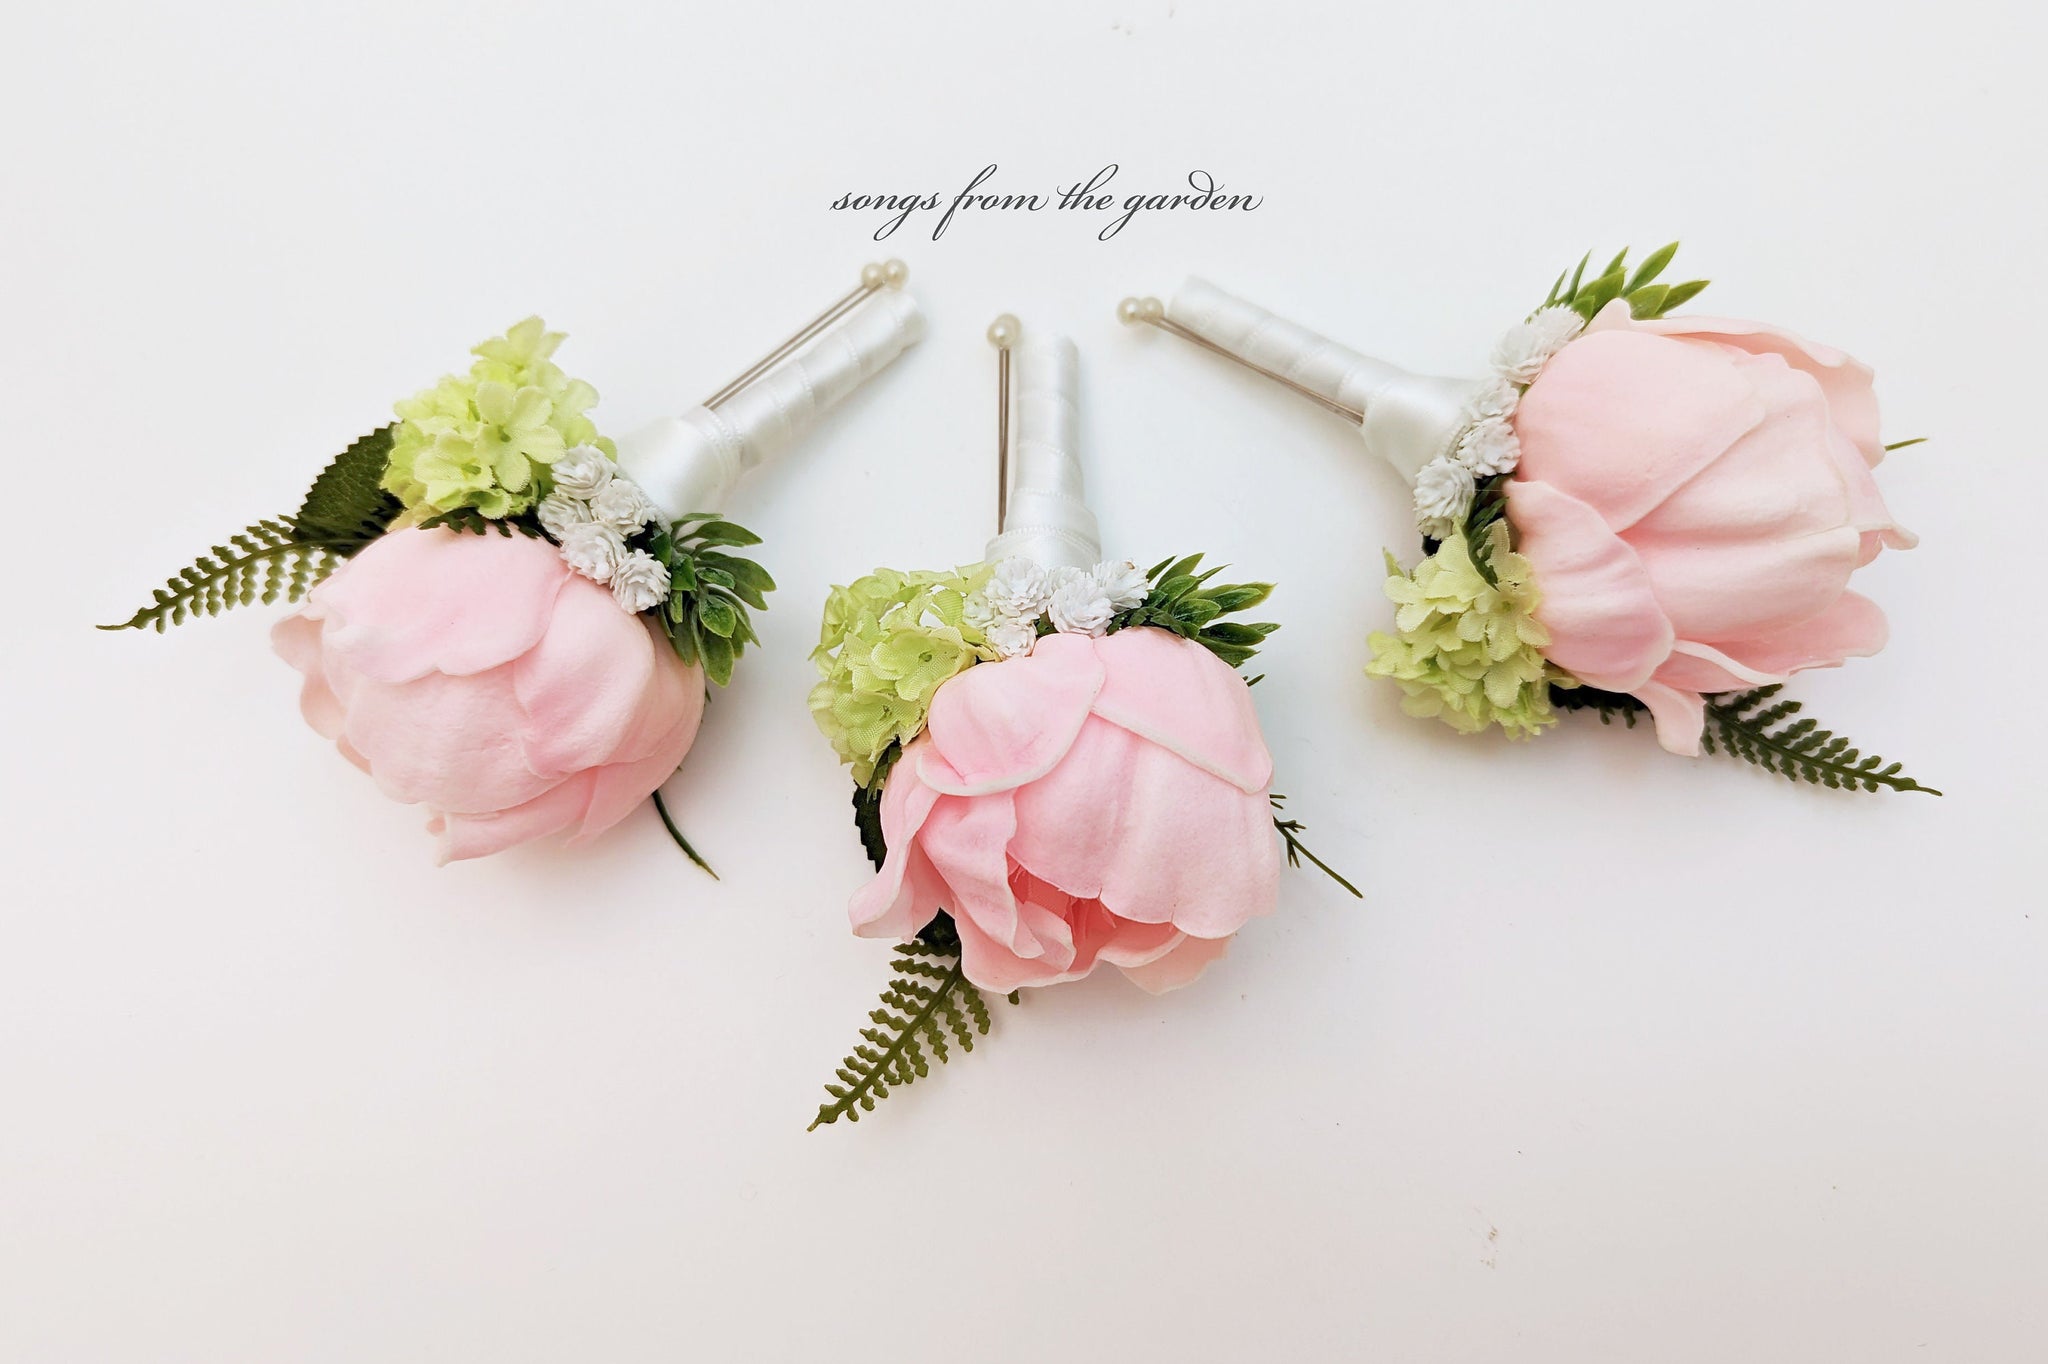 Pink Peony Boutonnieres - Hops Baby's Breath and Viburnum Accents -  Groom Groomsmen Boutonnieres Prom Homecoming Boutonniere